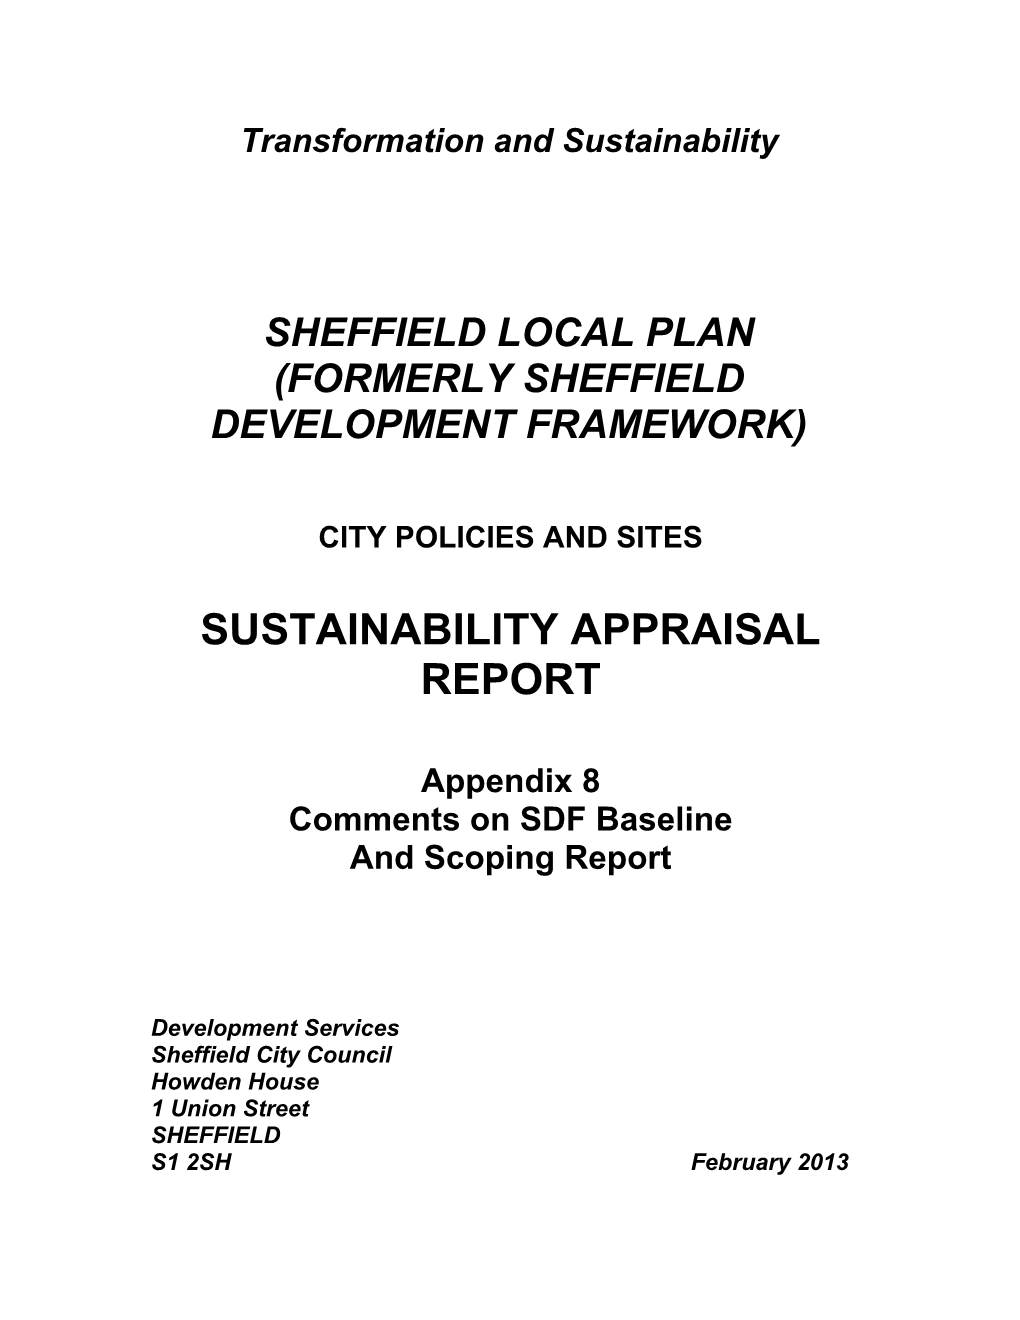 Summary of Responses to Baseline and Scoping Report July 2005